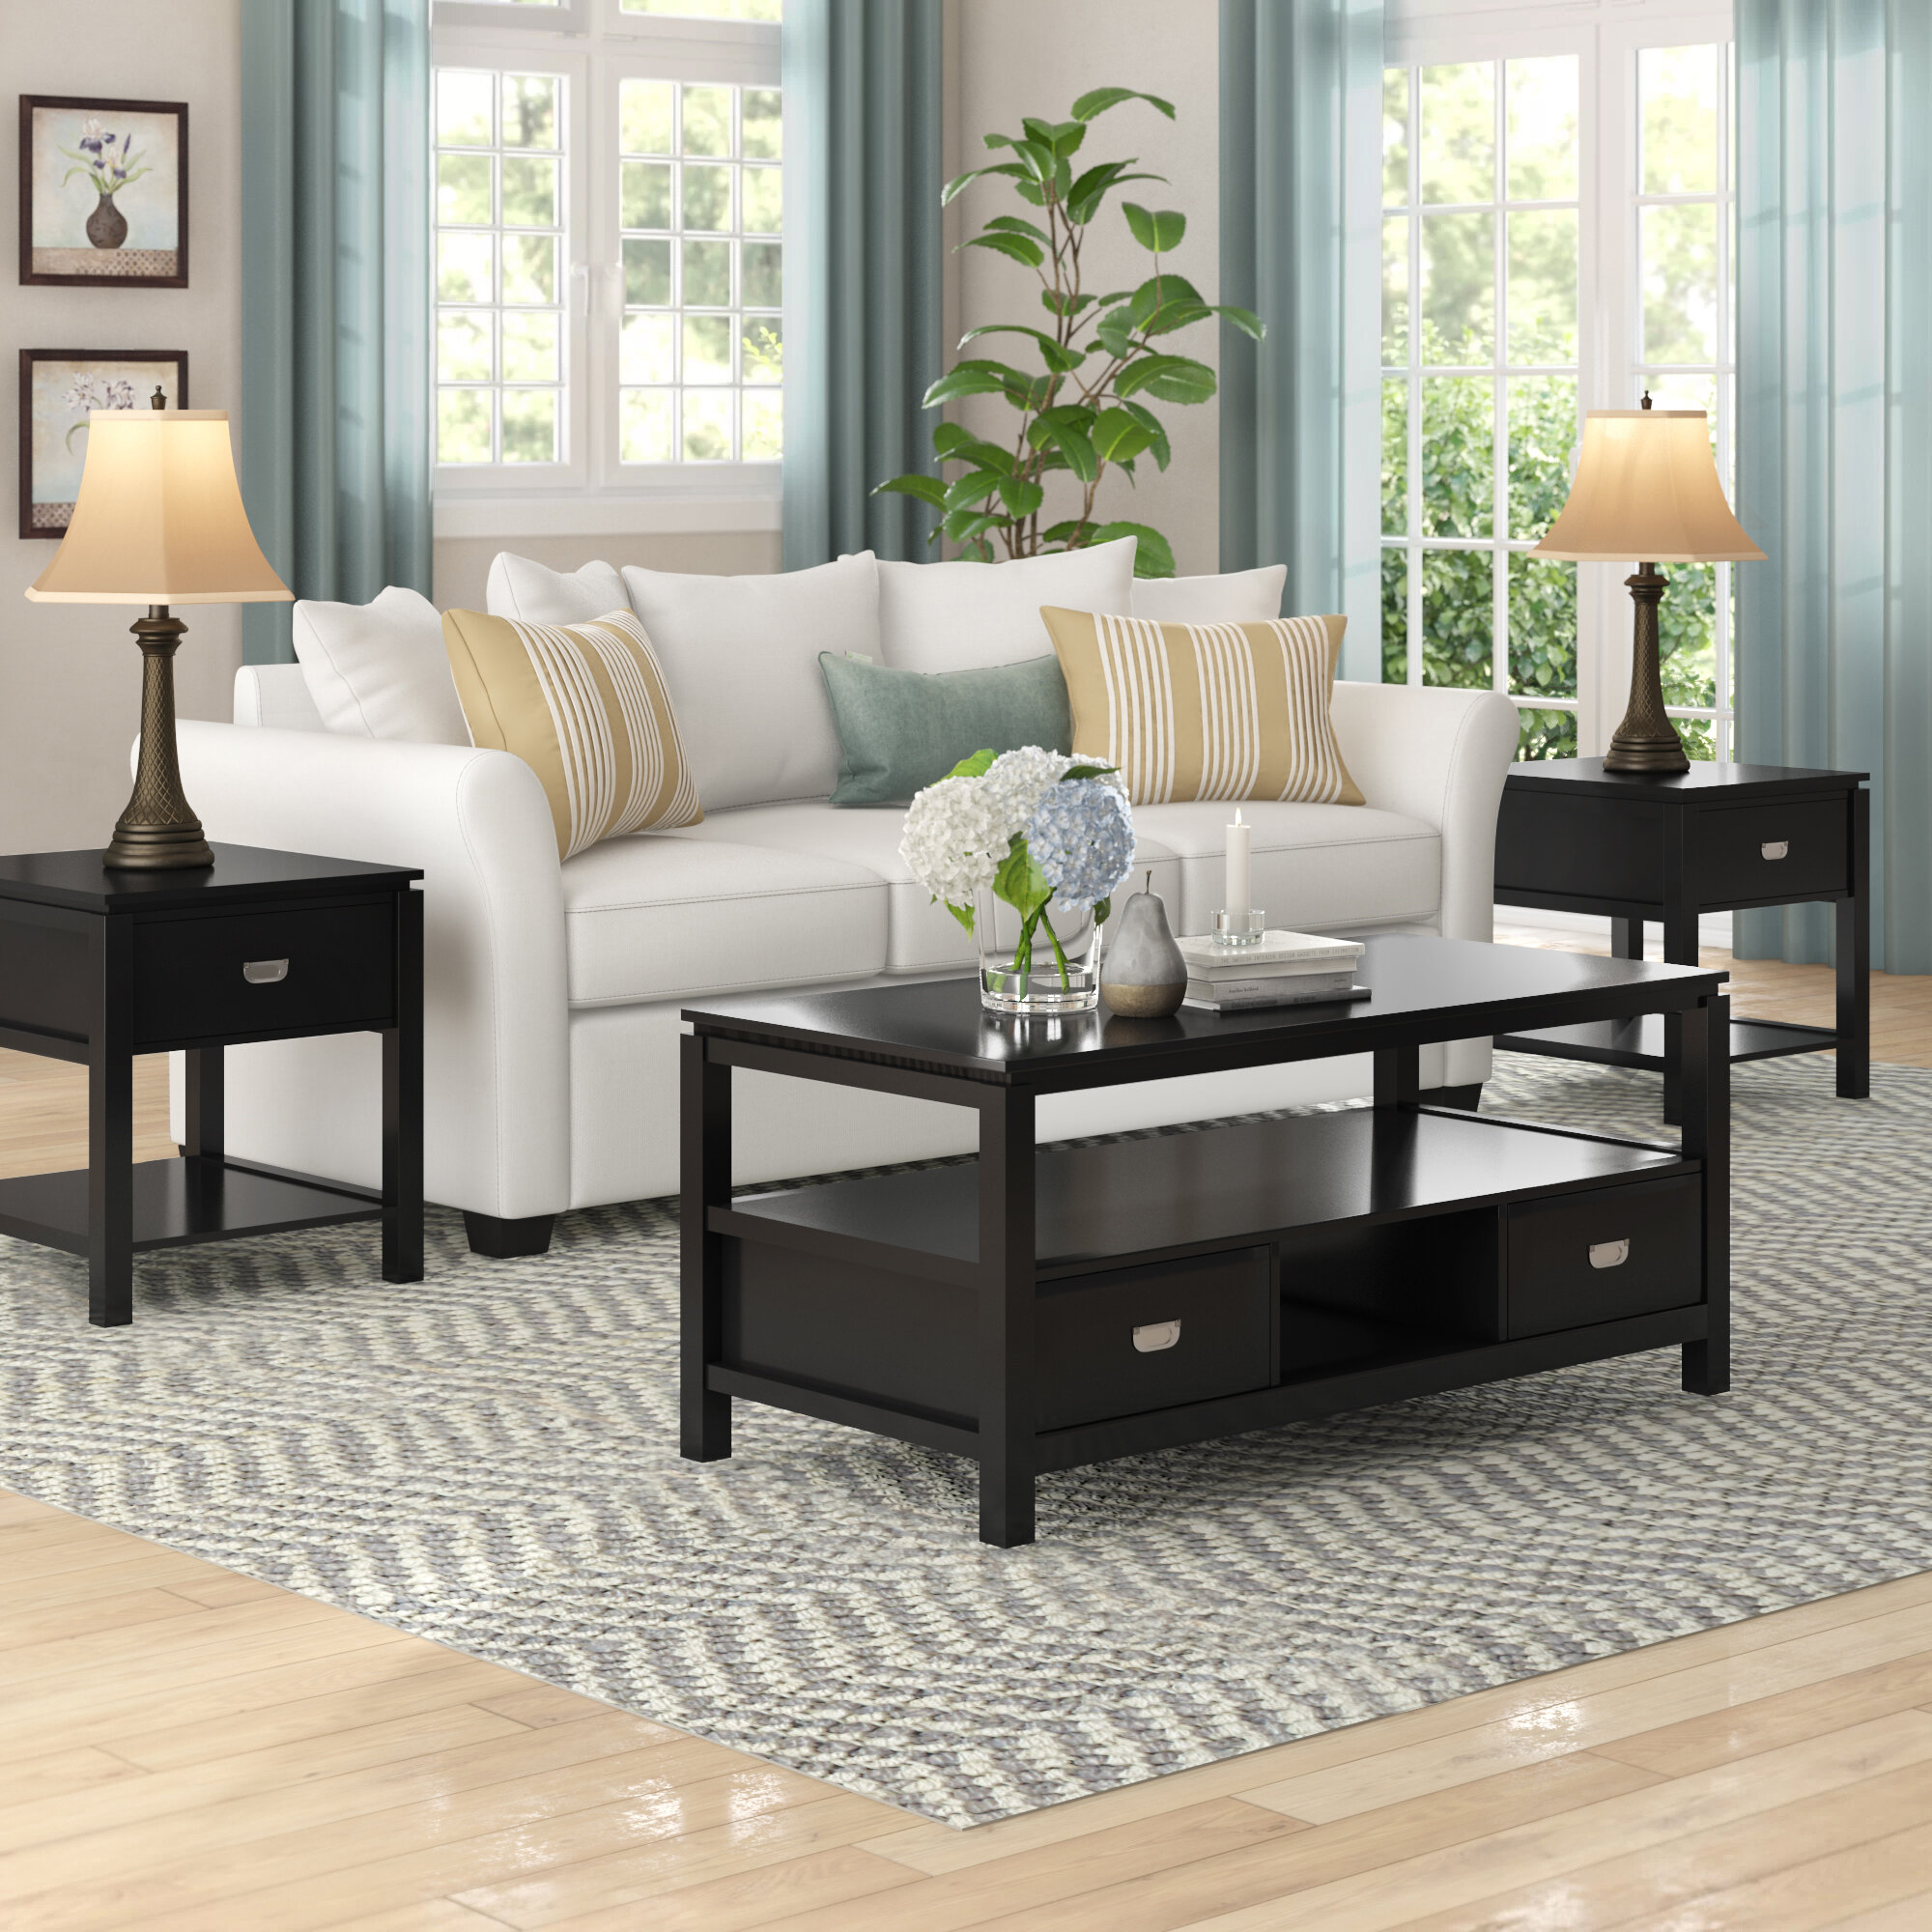 3 Piece Set Black Coffee Table Sets Youll Love In 2021 Wayfair